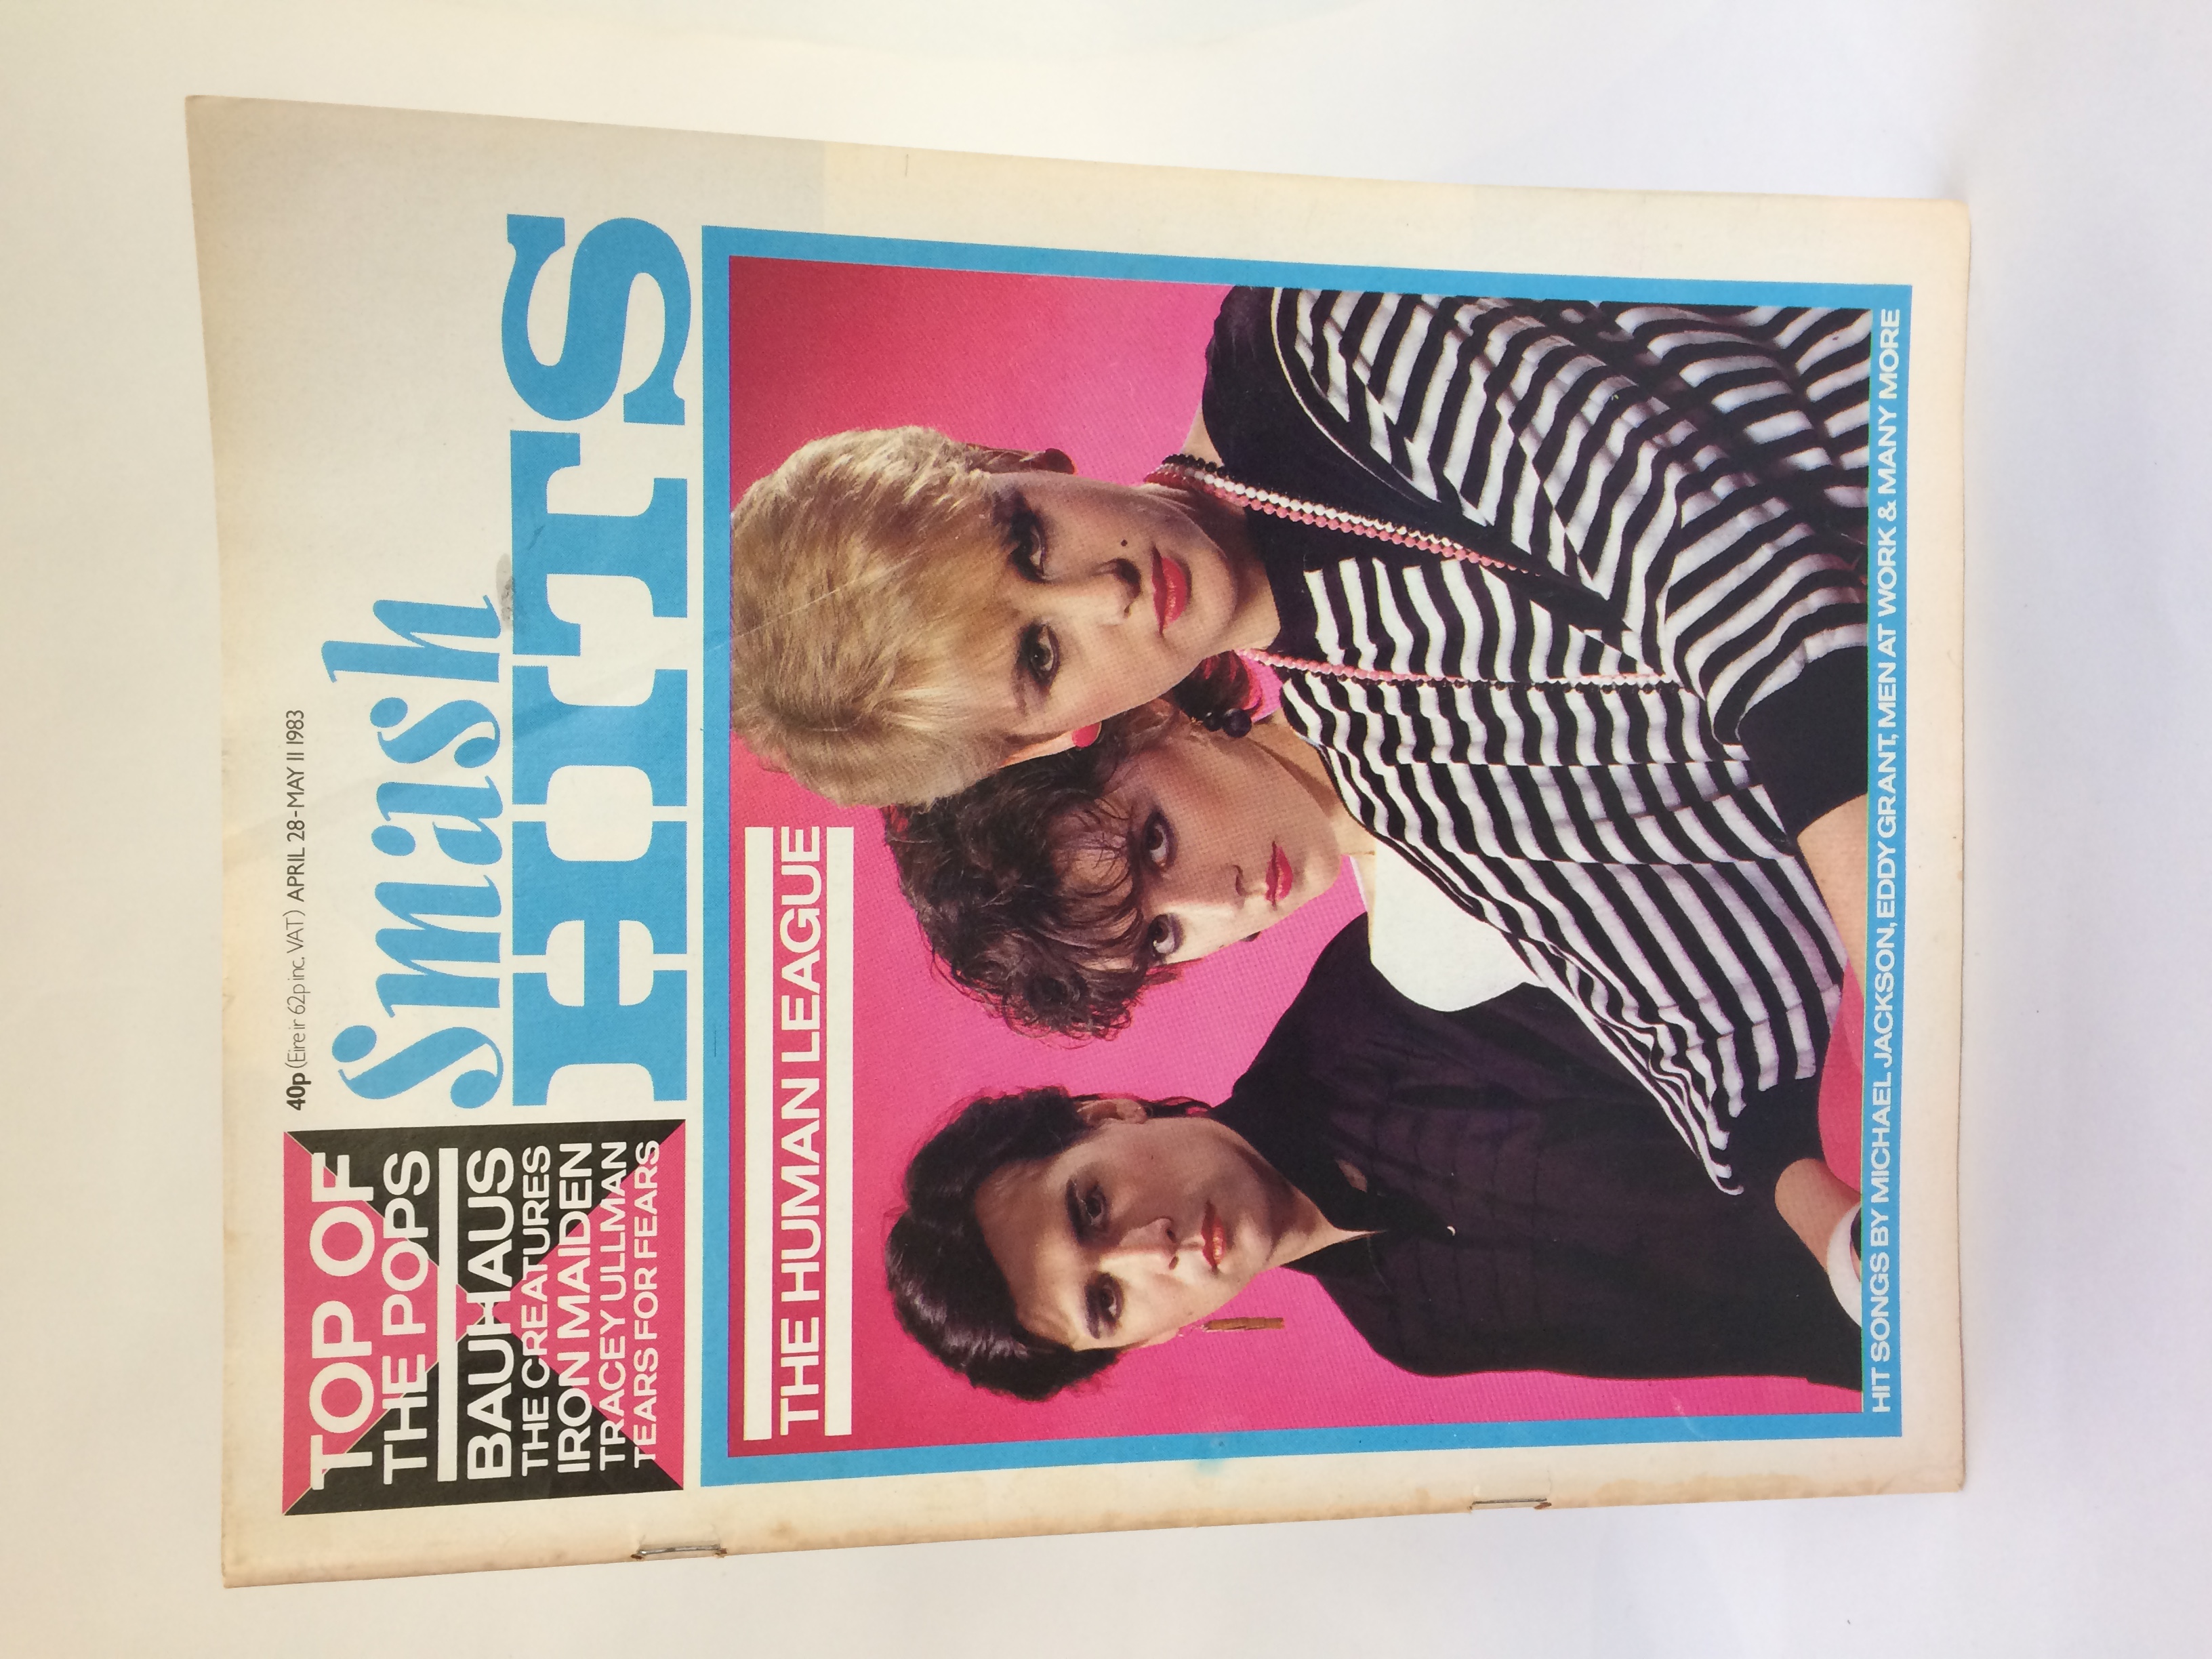 Front cover of Smash Hits magazine dated 1983